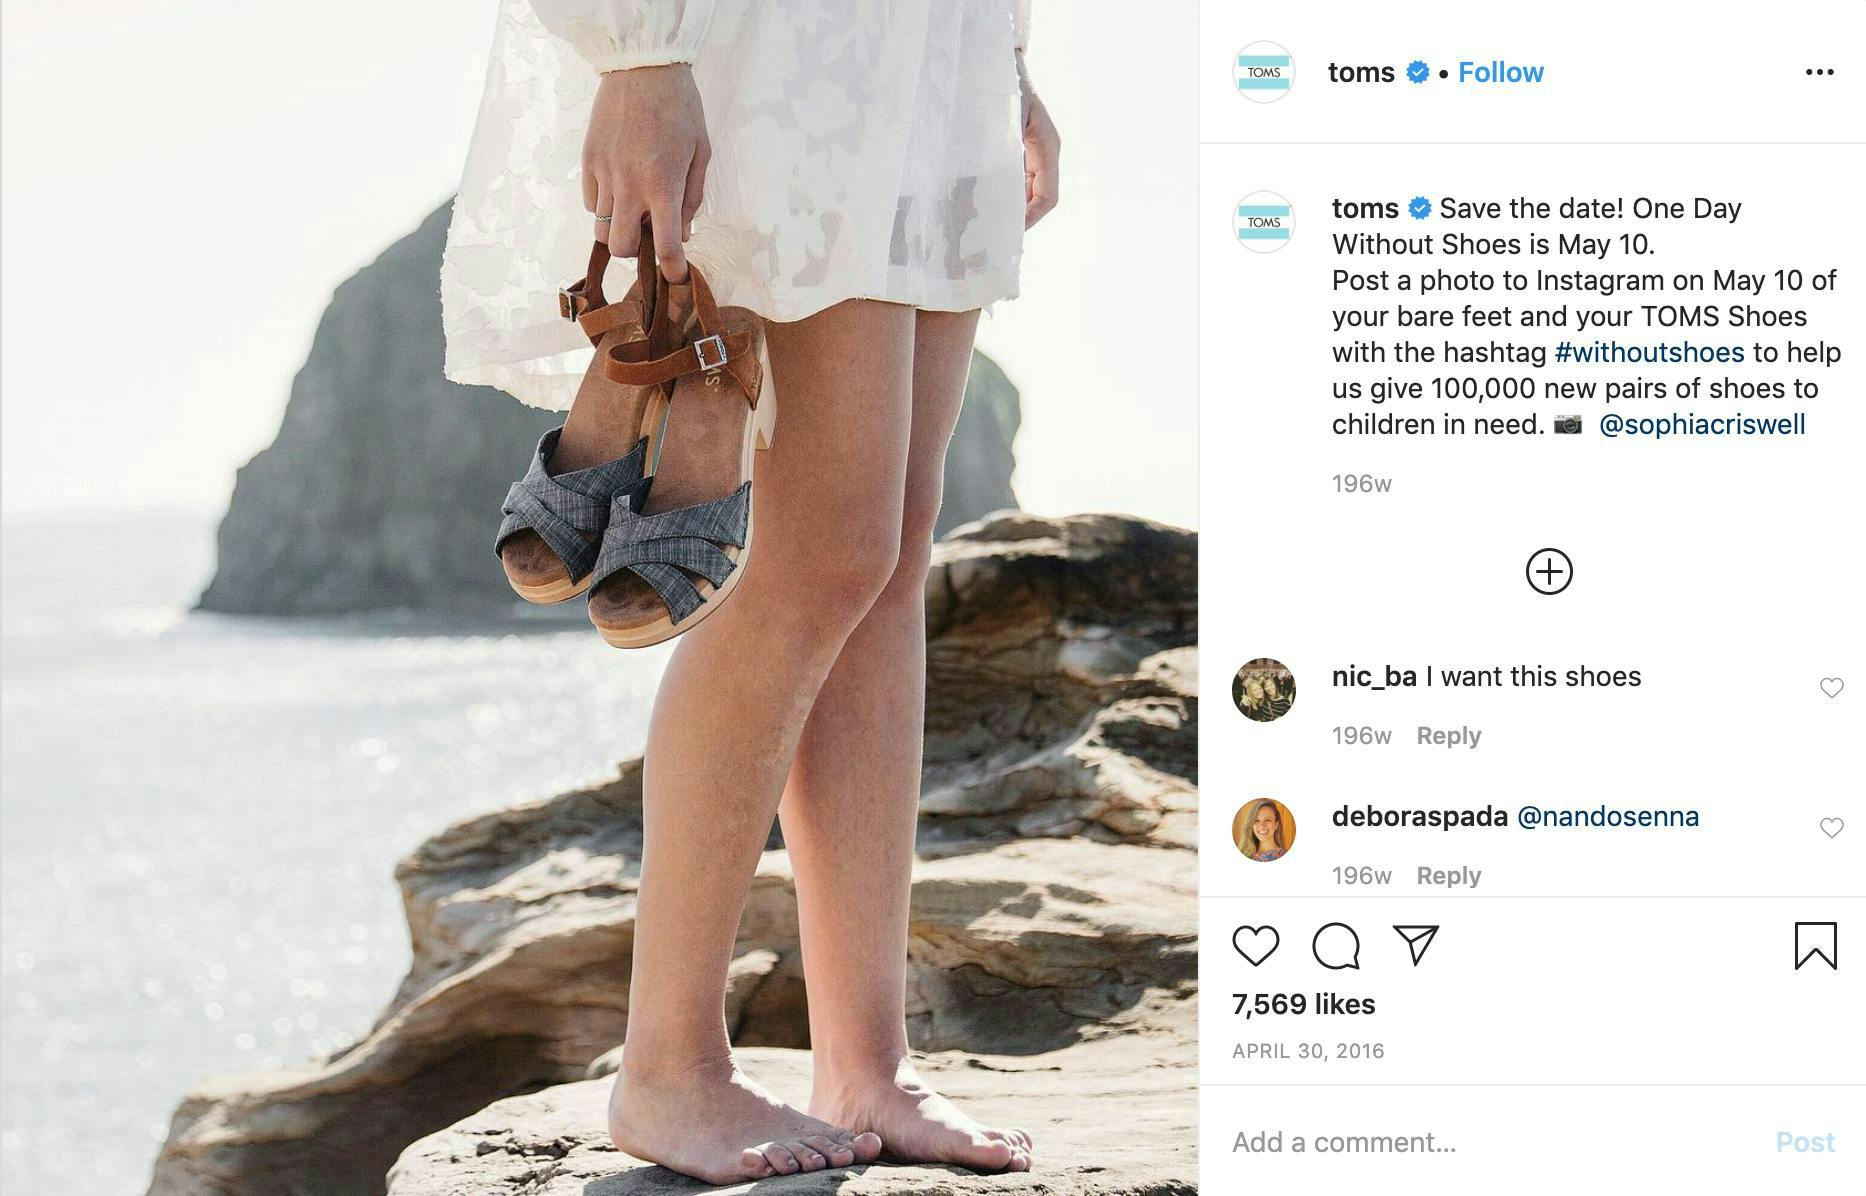 TOMS influencer strategy